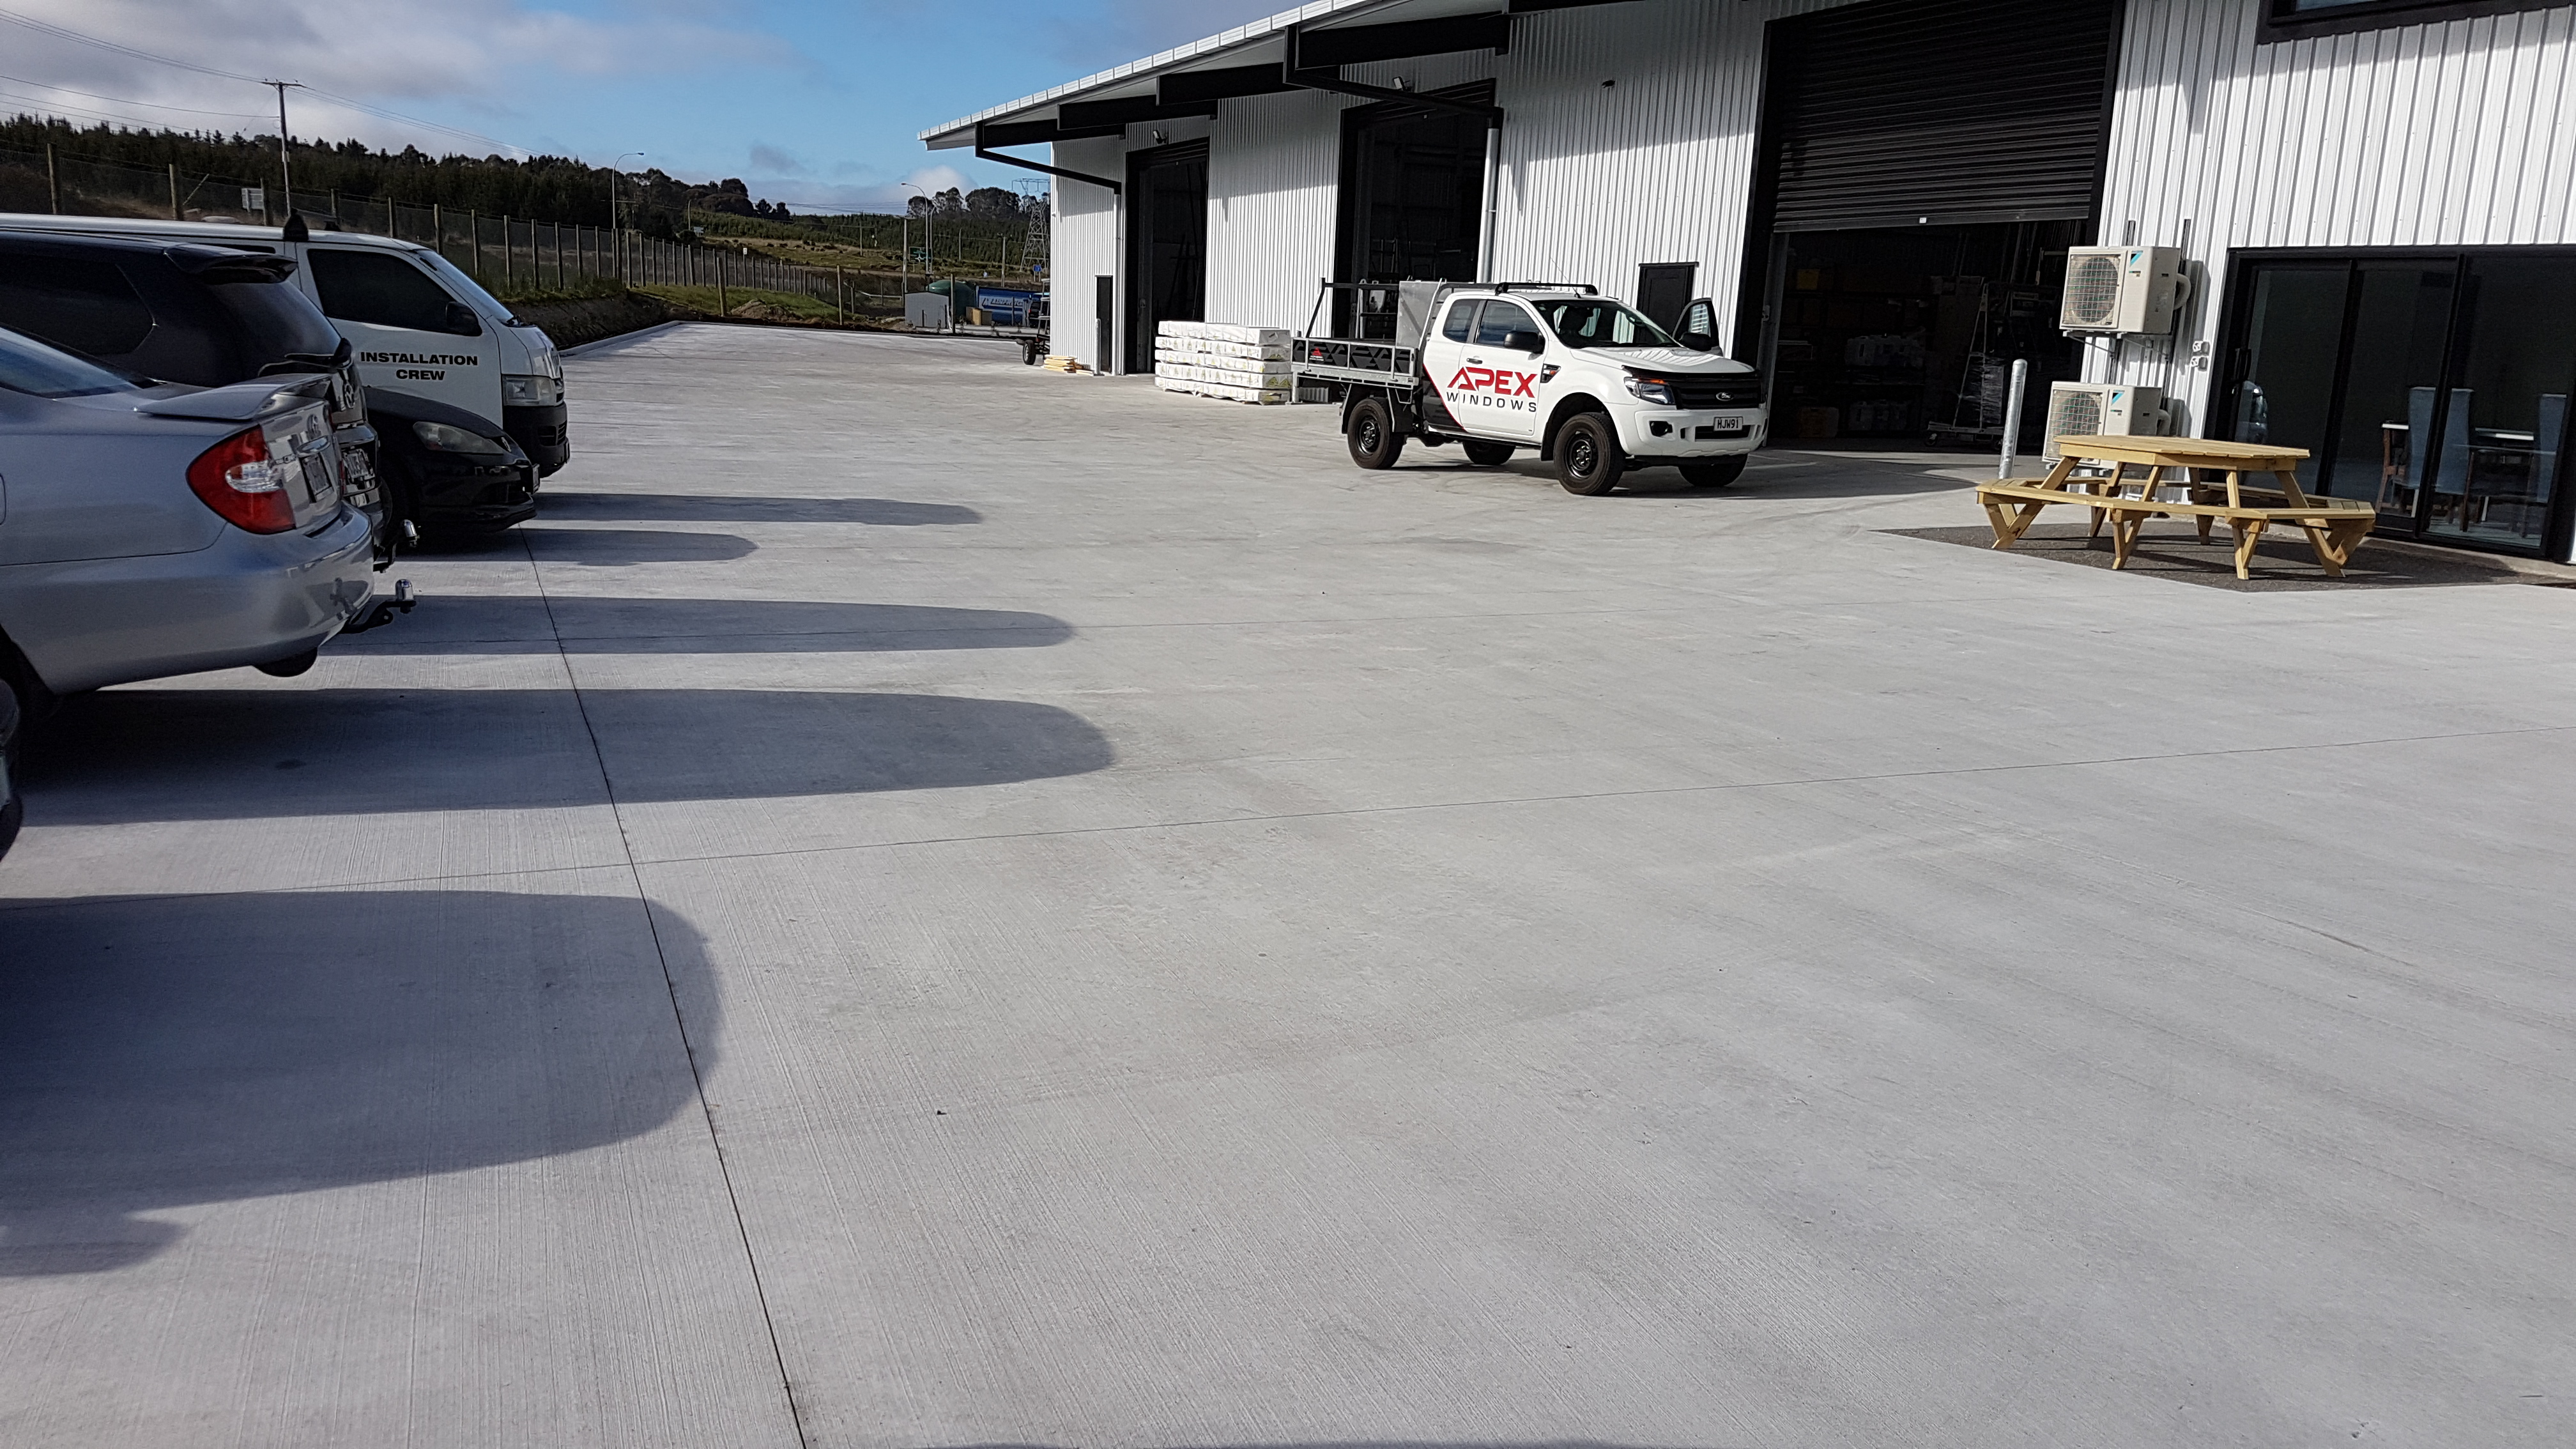 This business makes use of a large concrete fibre loading bay and access bay for its commercial building